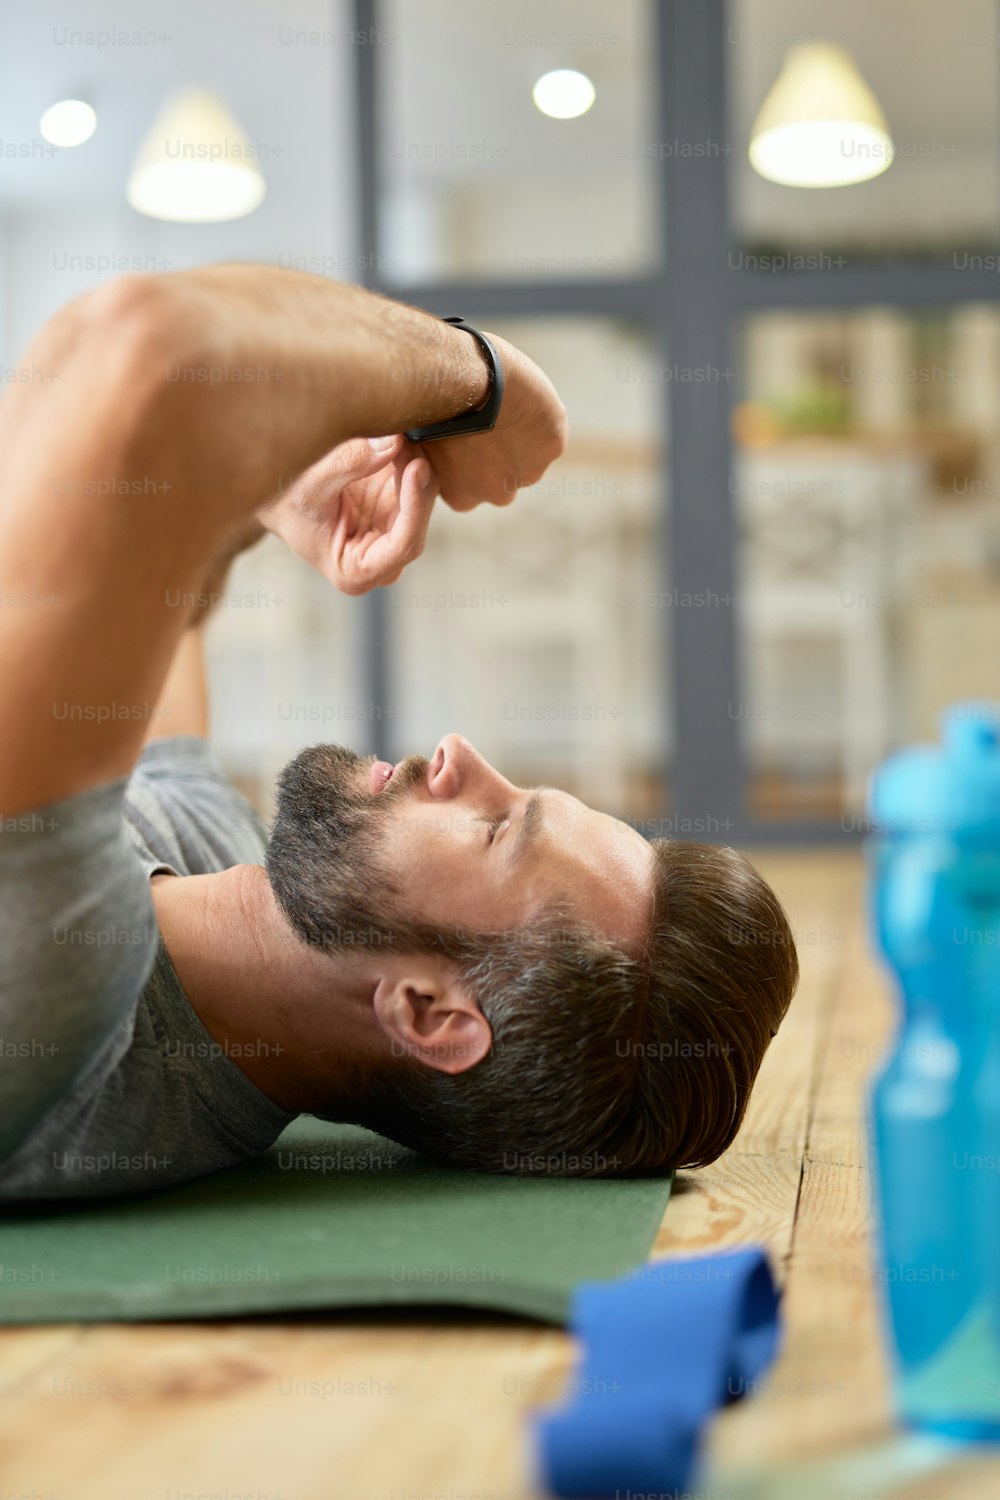 Handsome gentleman lying on exercise mat and looking at modern wearable gadget on his wrist